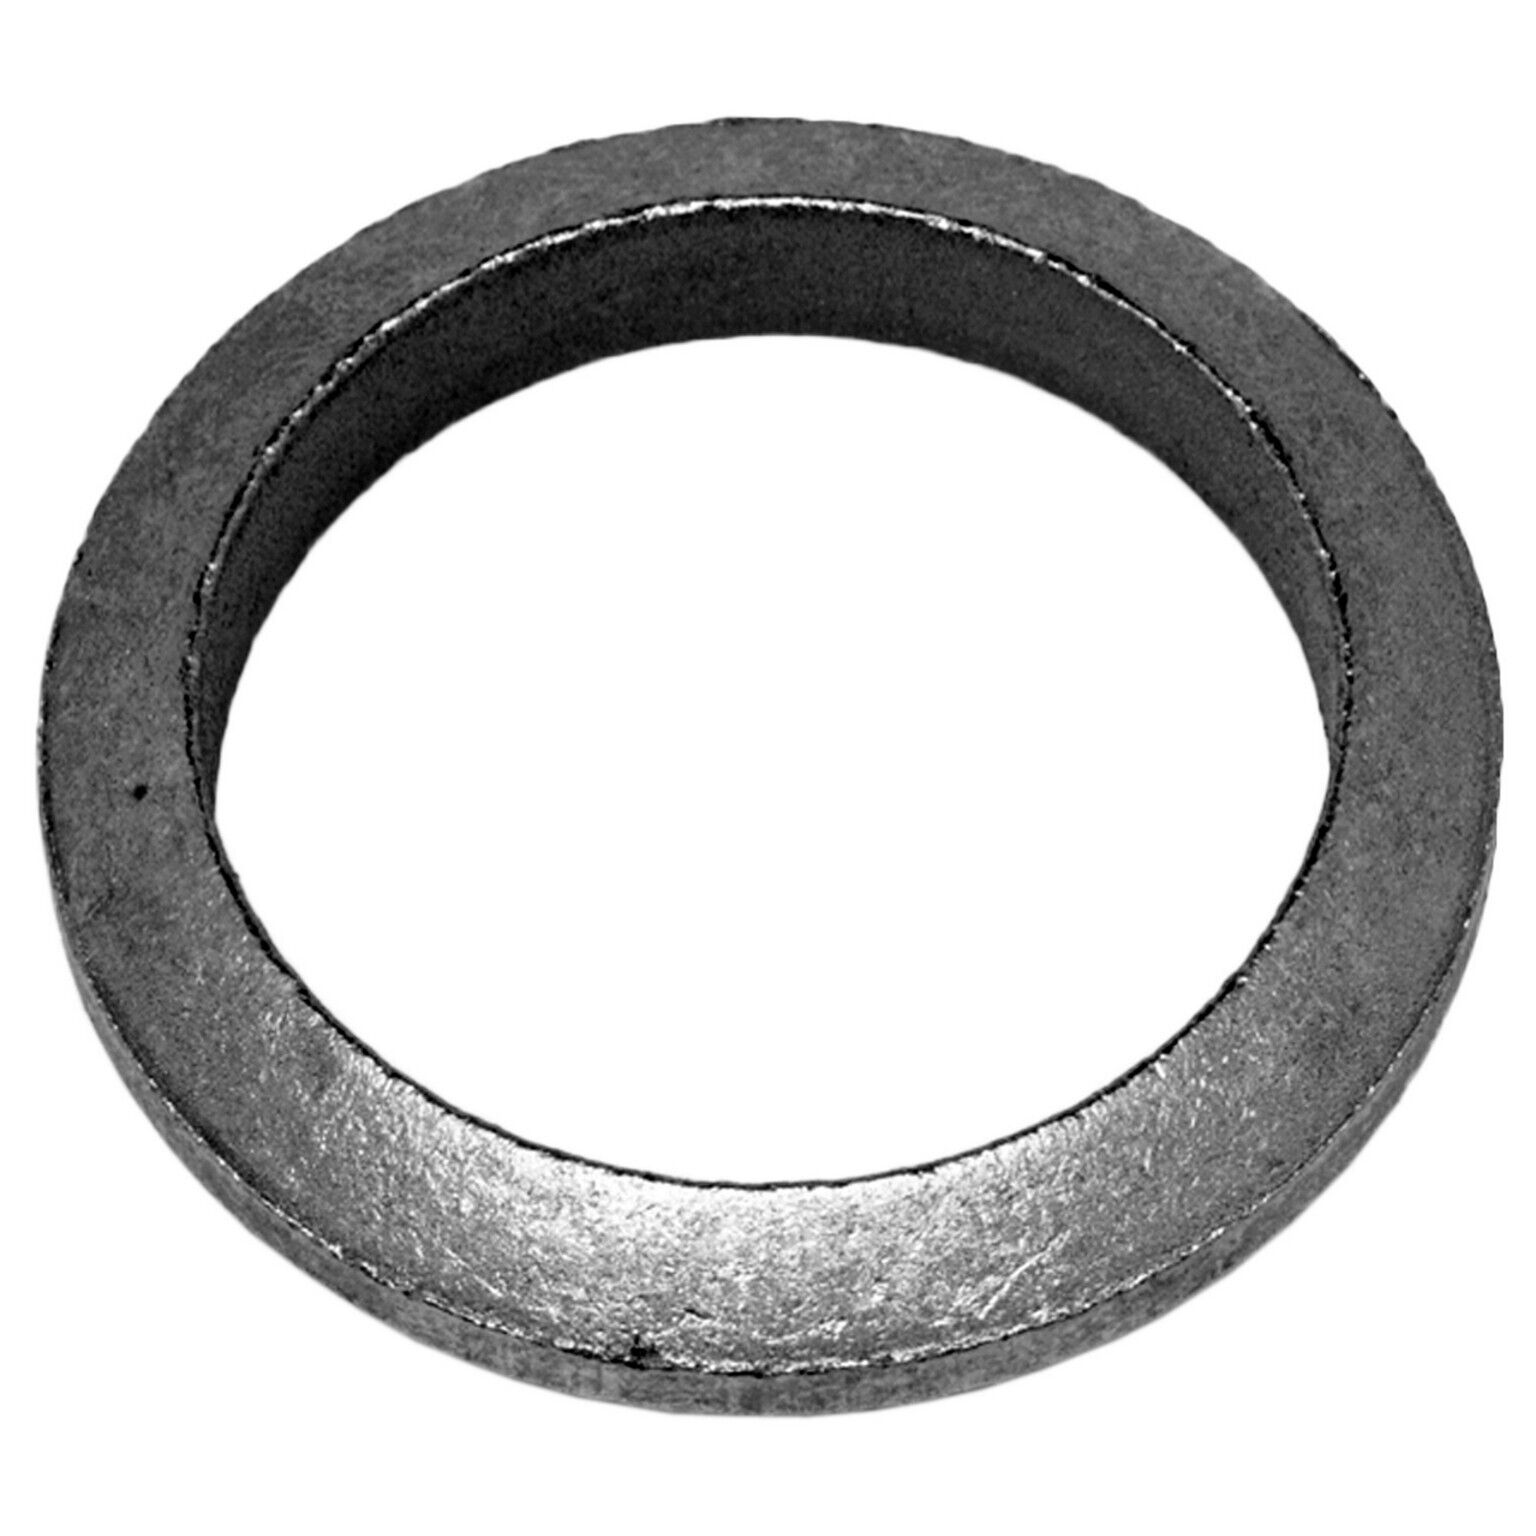 Exhaust Pipe Flange Gasket for C230, 300D, 400SEL, 500SEL, 300SD+More (31405)